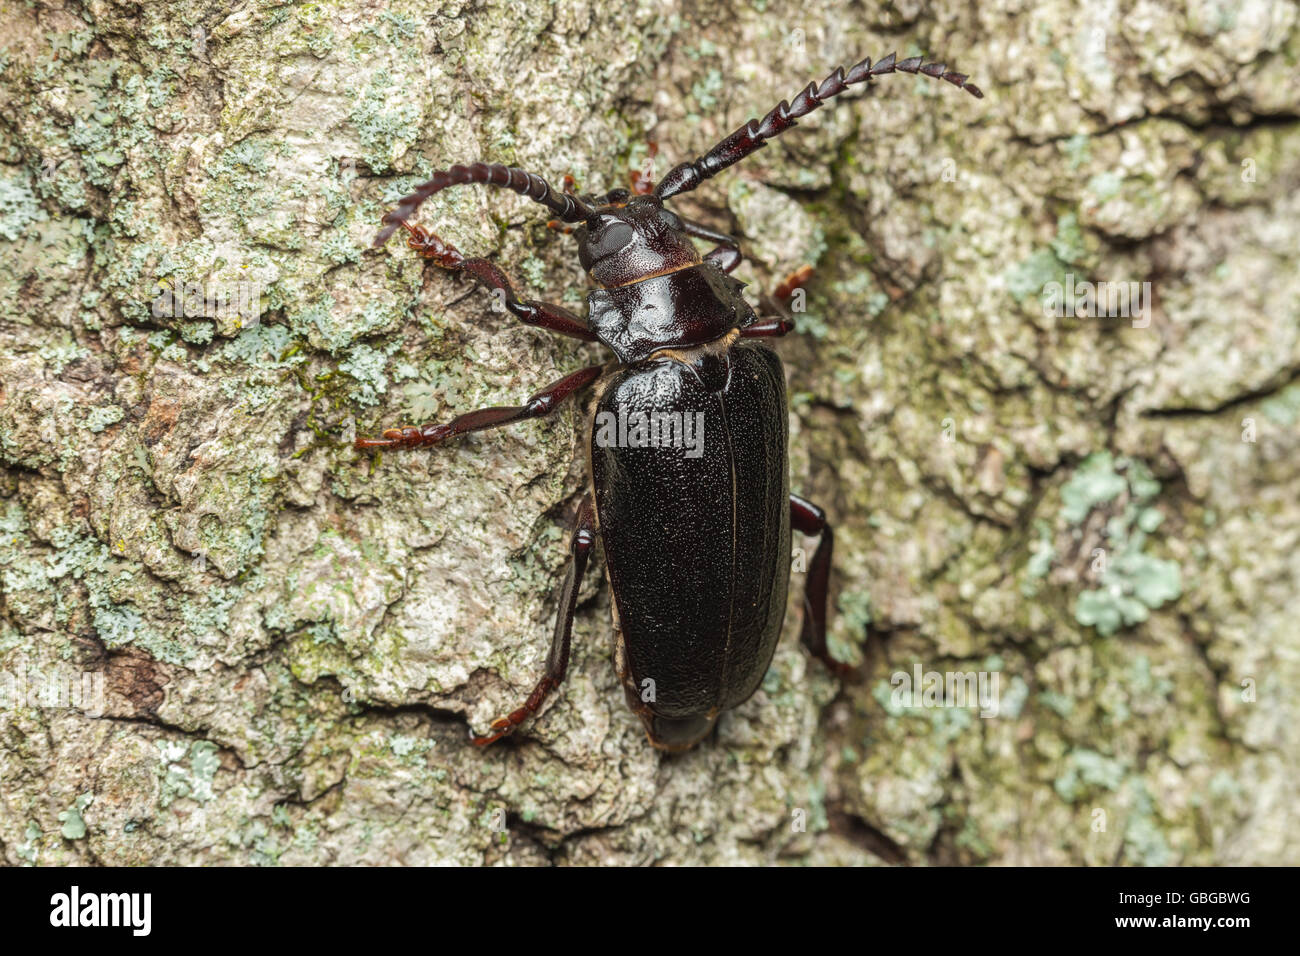 A female Broad-necked Root Borer (Prionus laticollis) clings to the side of a tree. Stock Photo